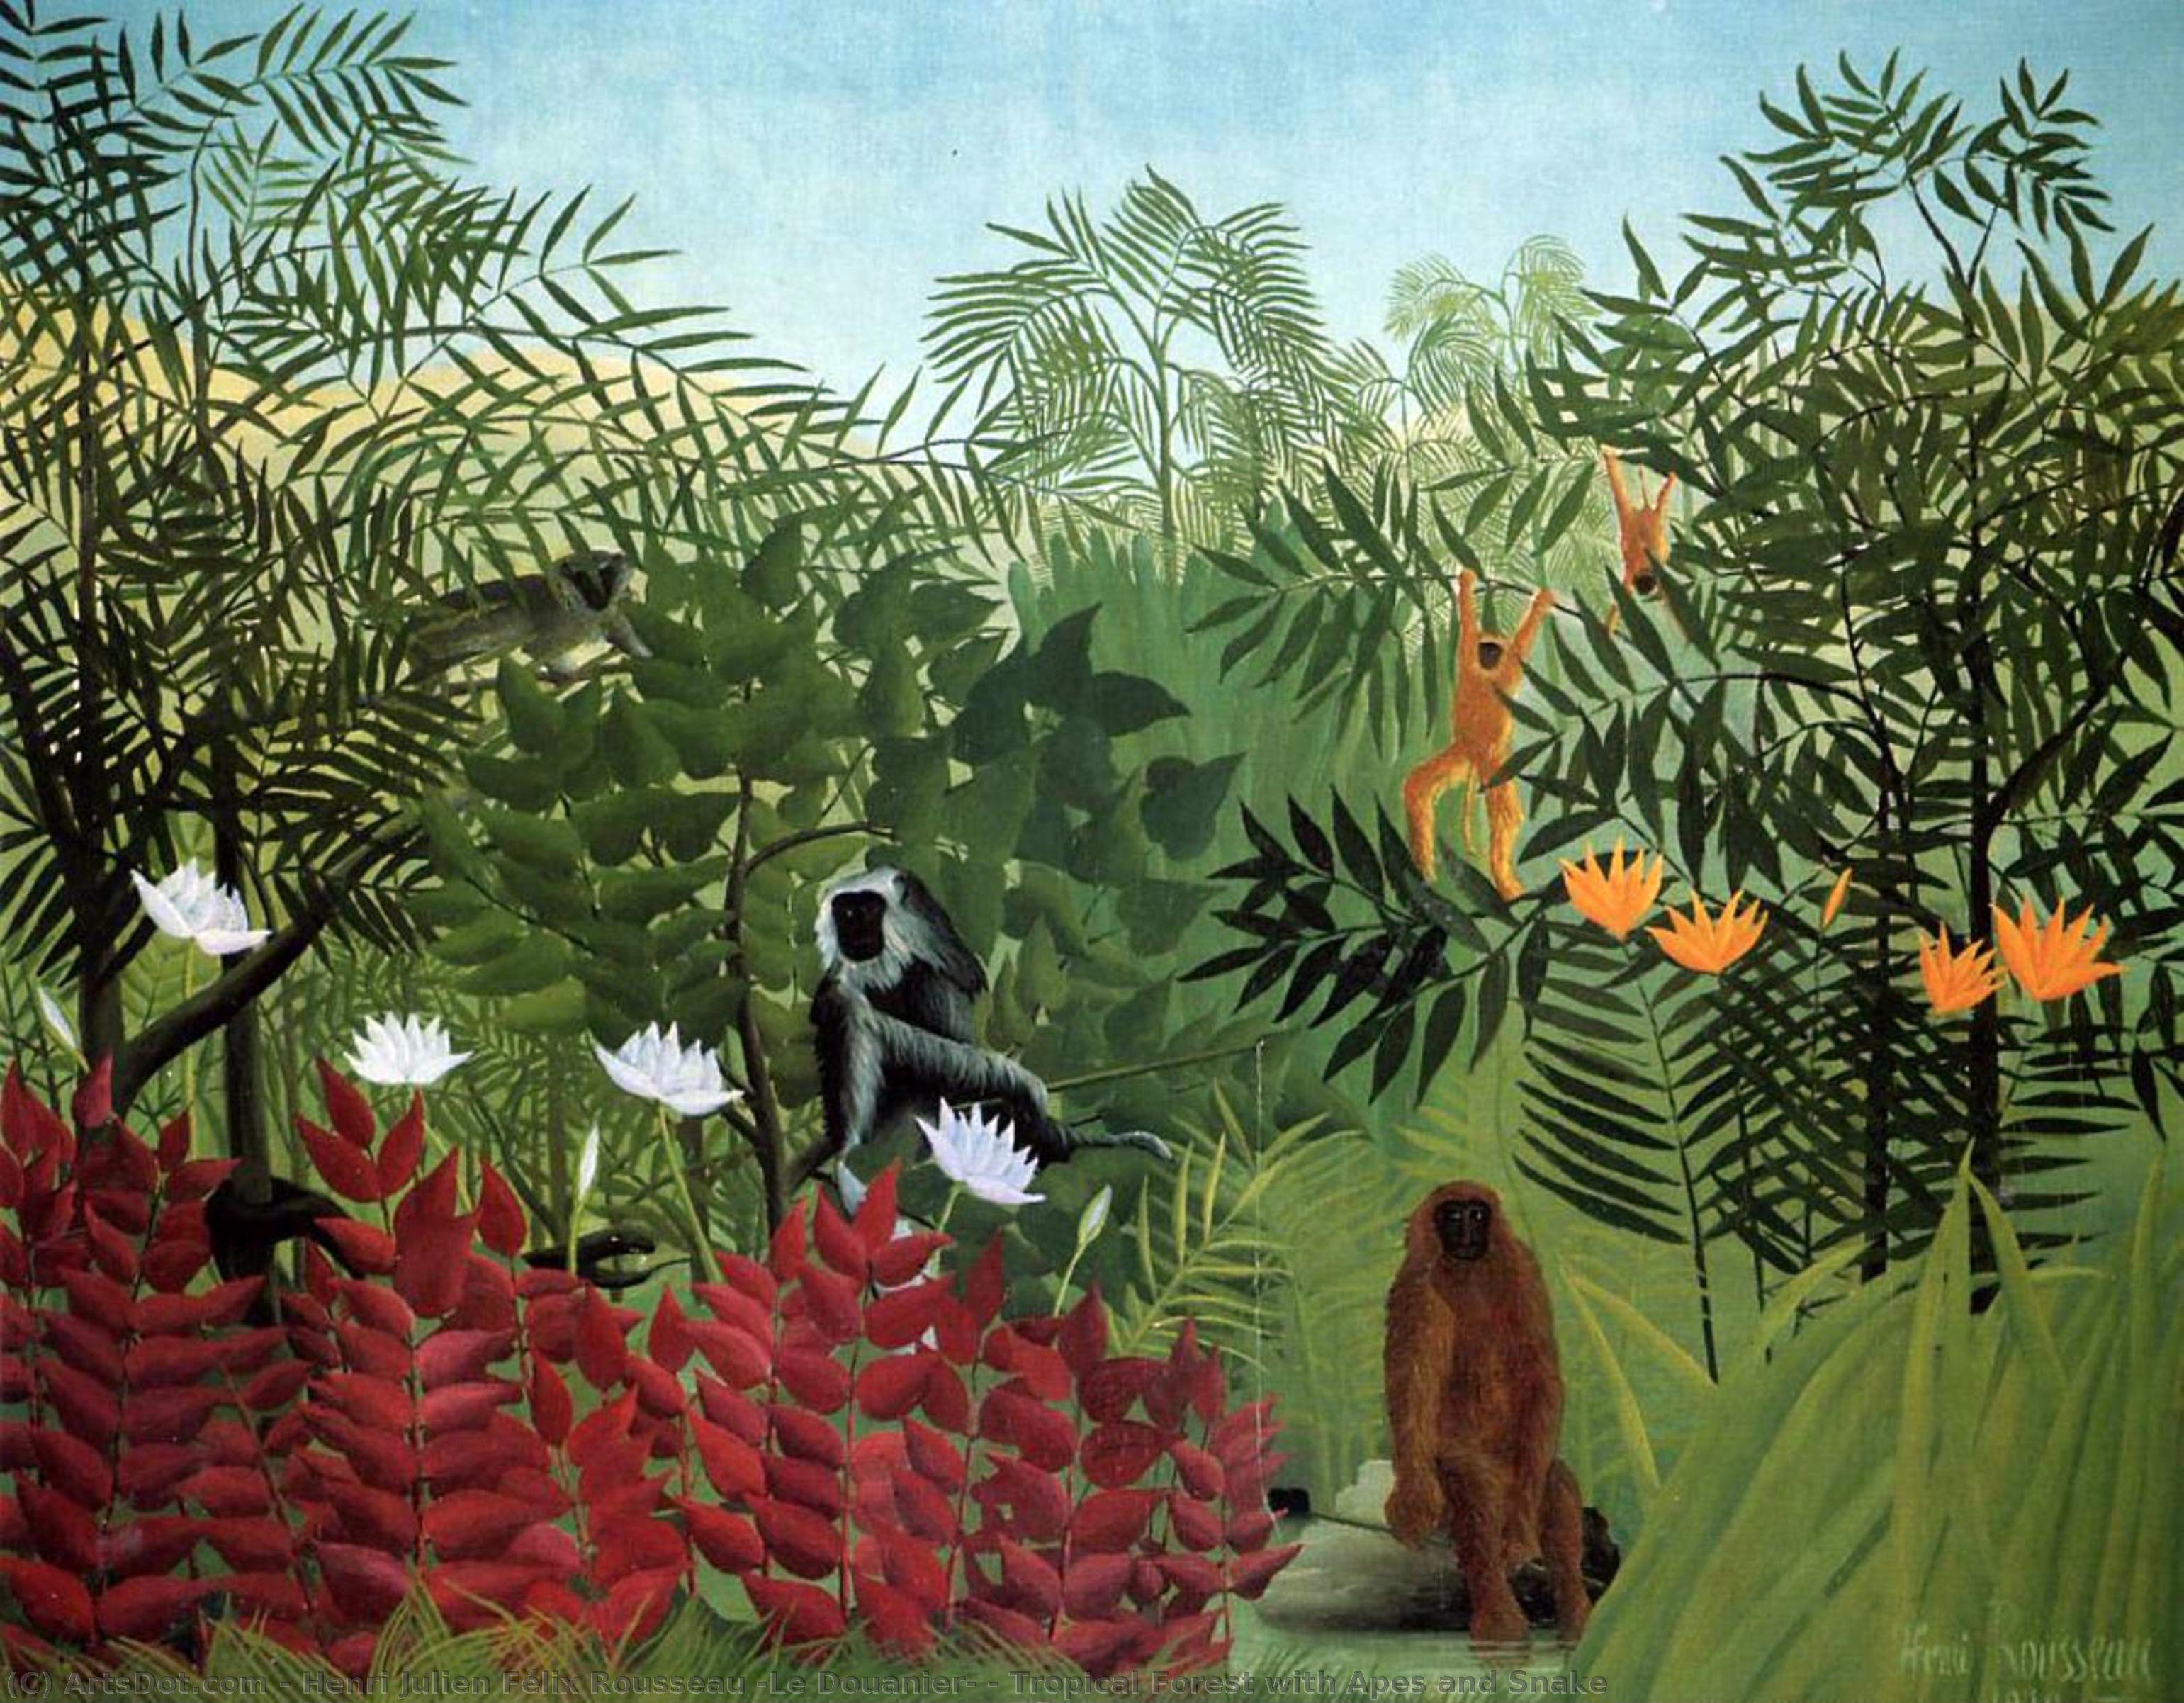 WikiOO.org - 백과 사전 - 회화, 삽화 Henri Julien Félix Rousseau (Le Douanier) - Tropical Forest with Apes and Snake